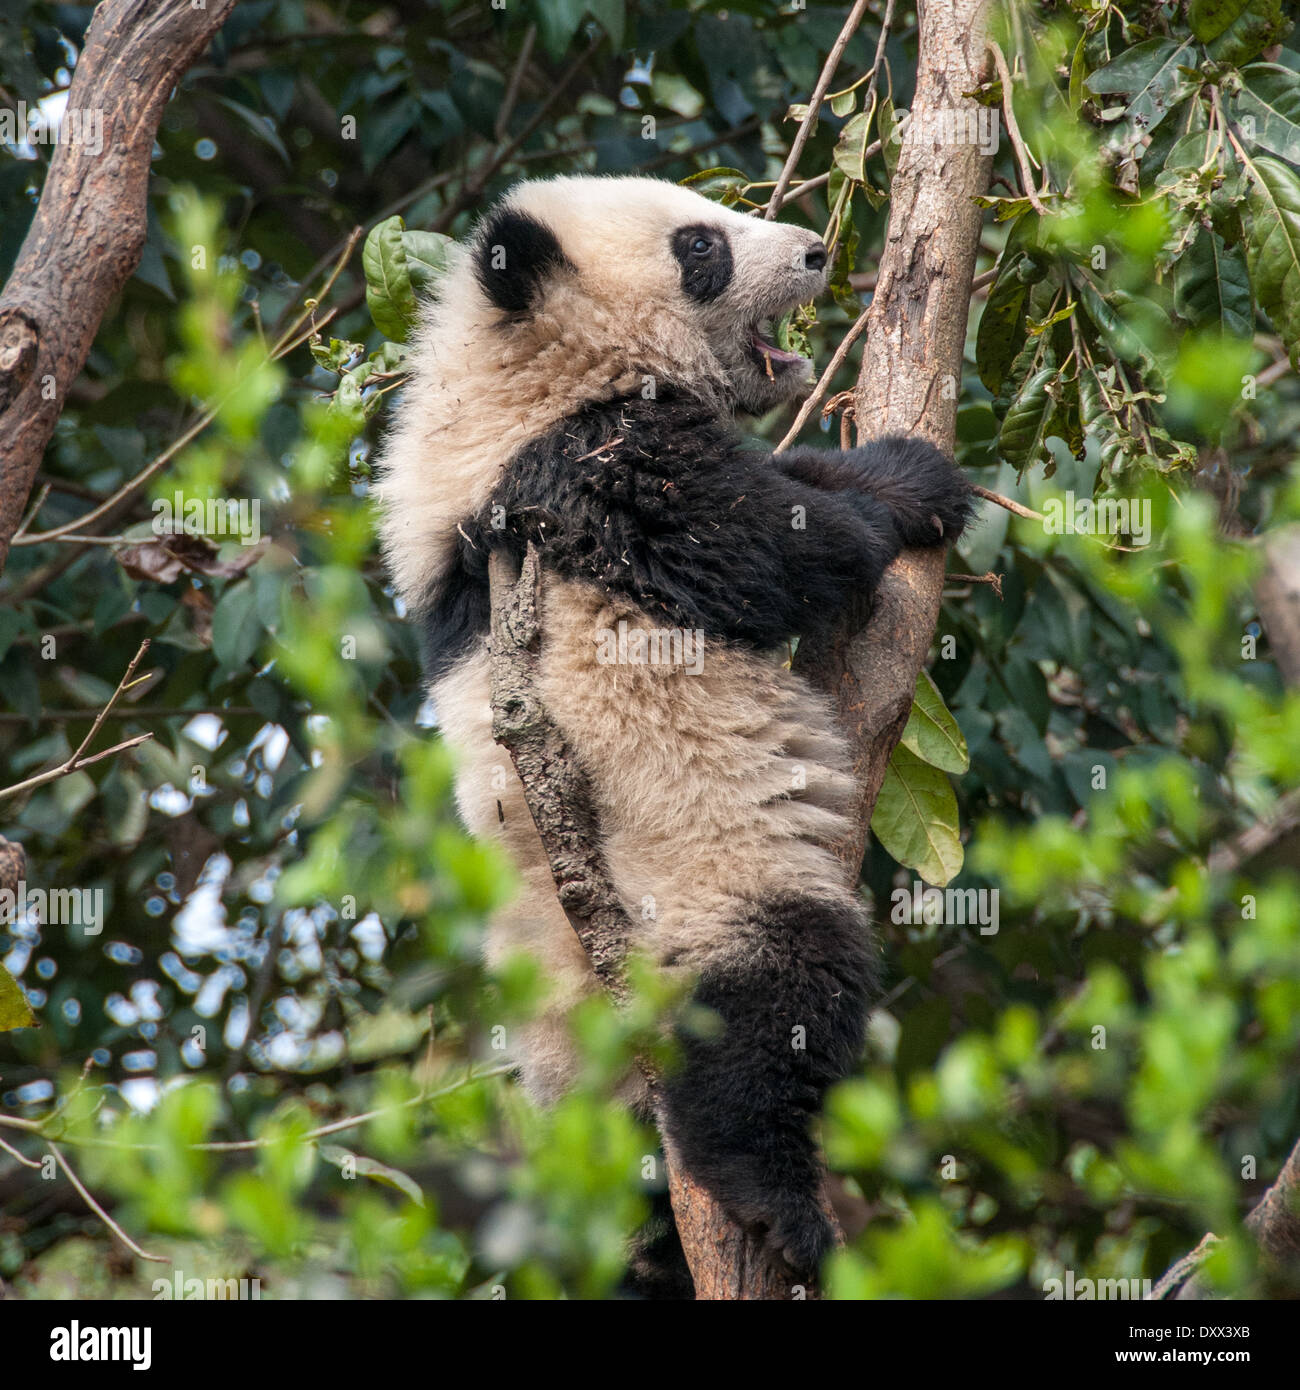 A giant panda sitting in a tree, China Stock Photo